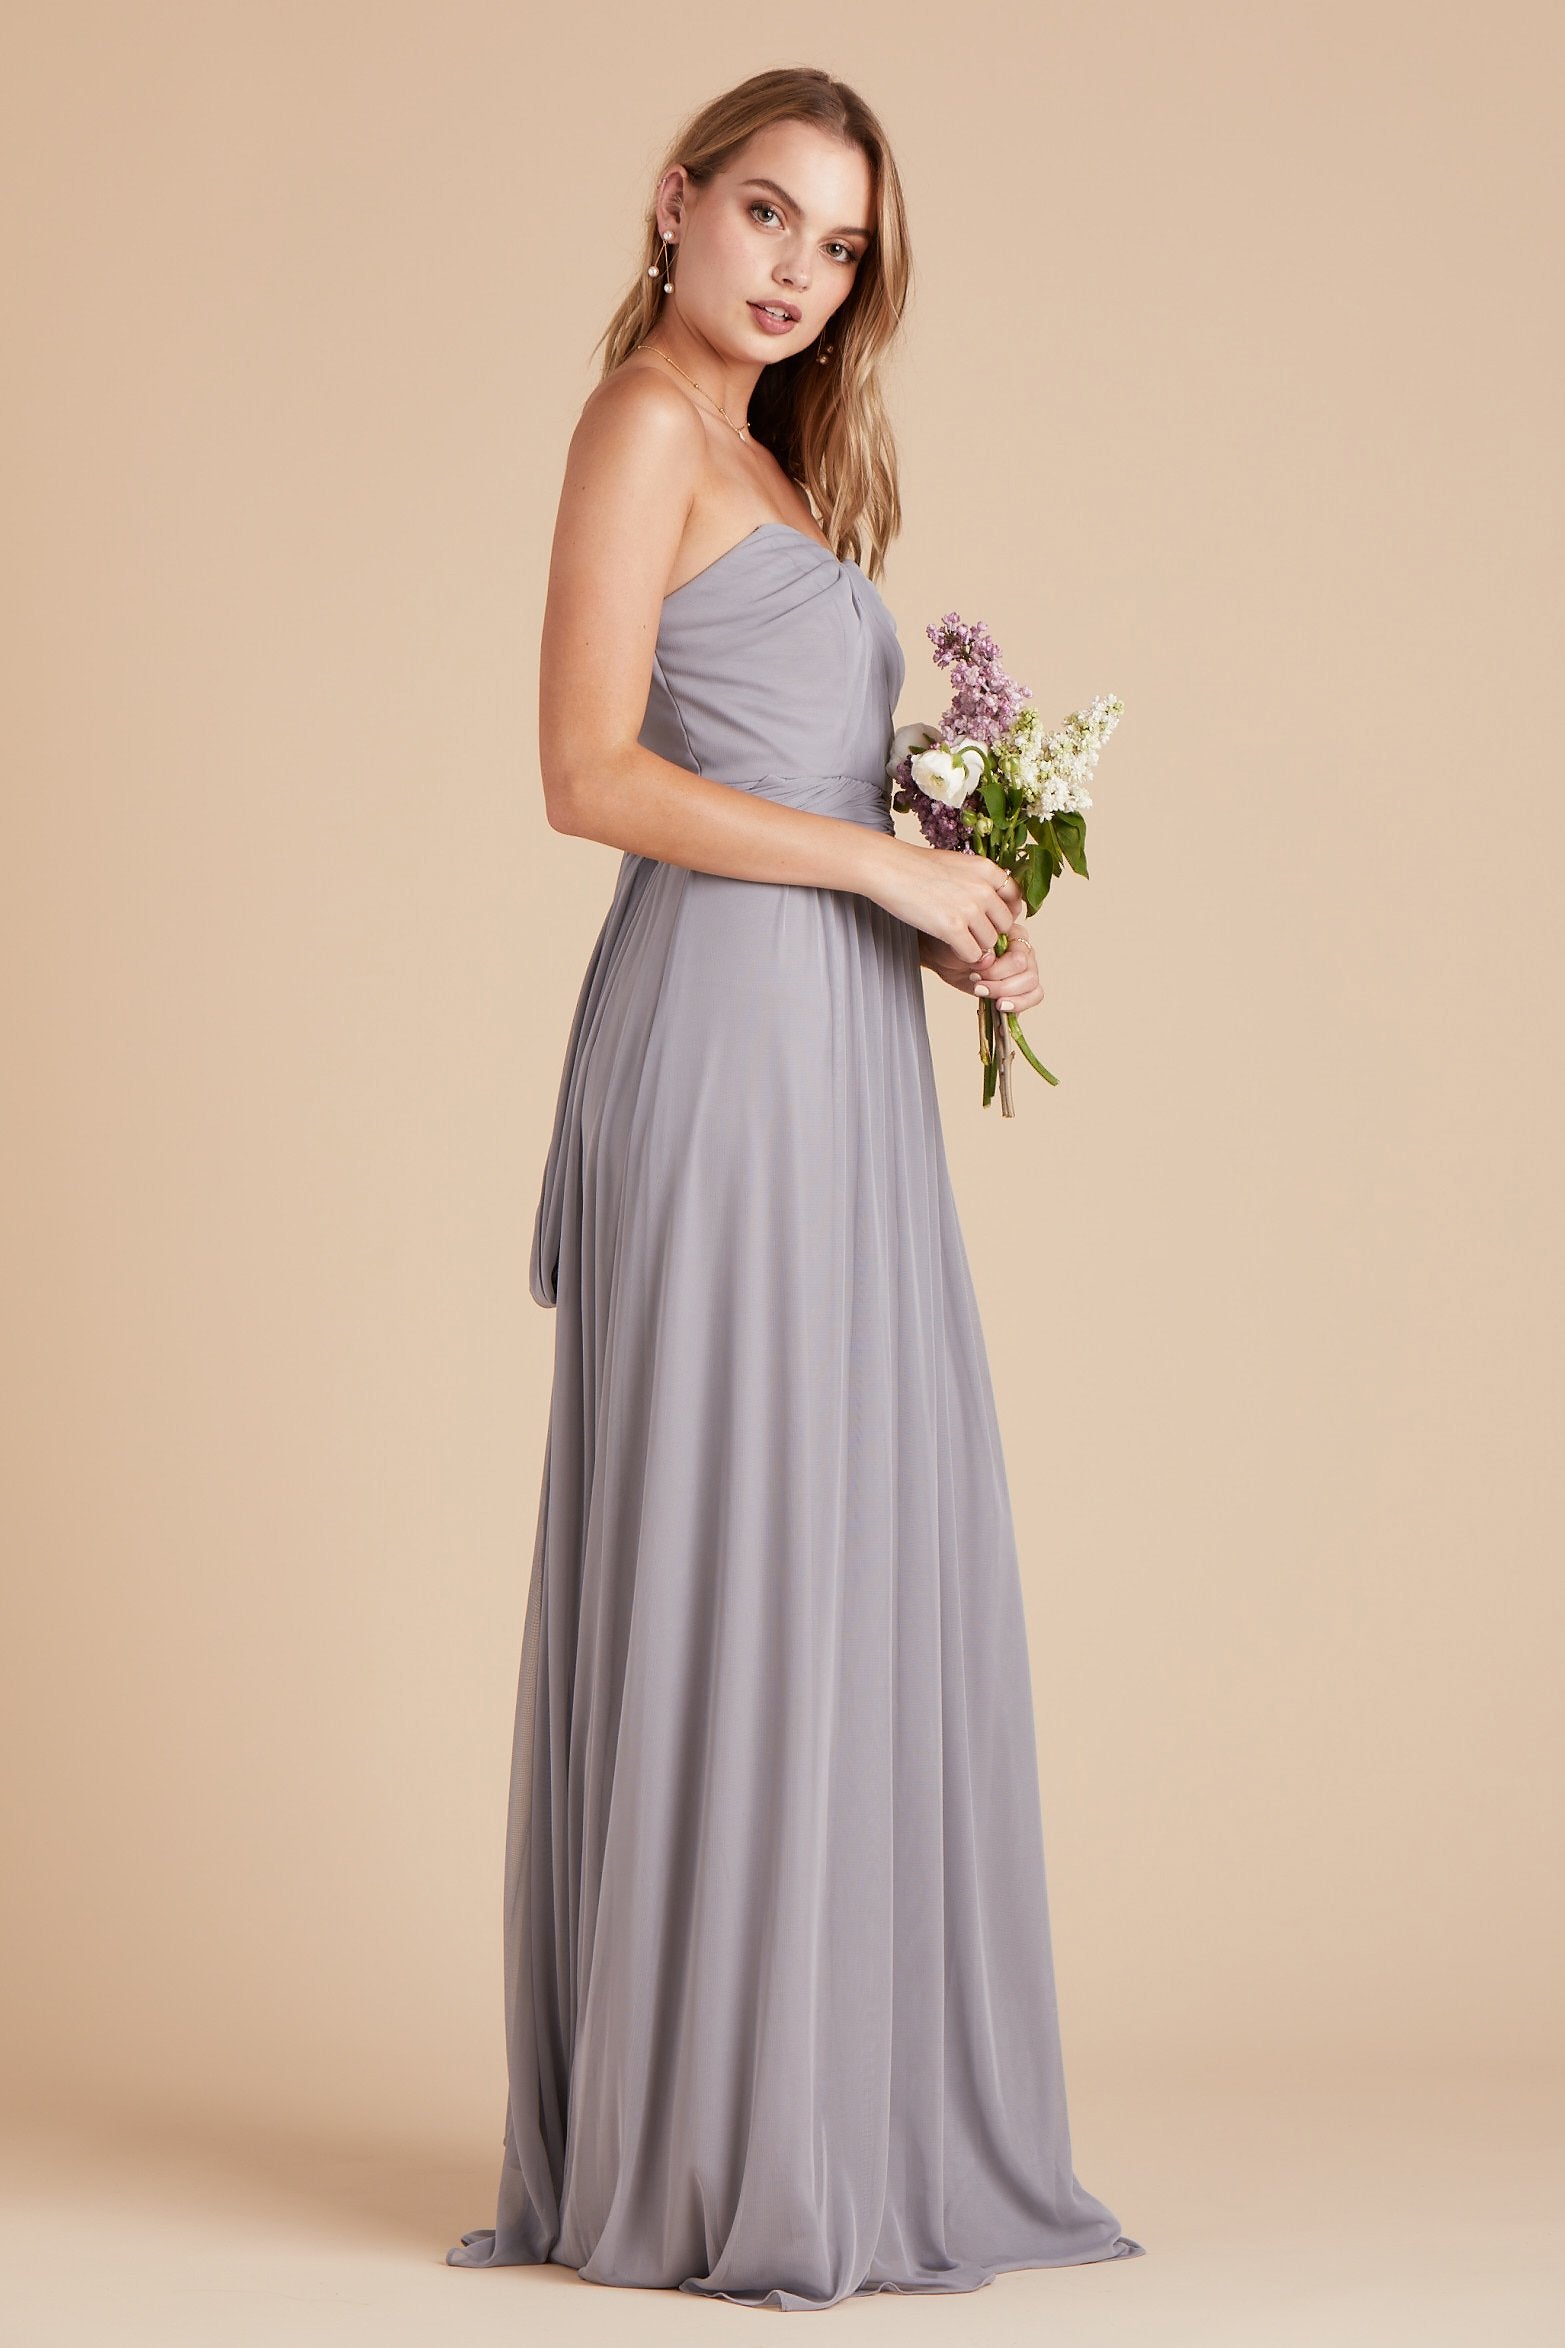 Chicky convertible bridesmaid dress in silver mesh by Birdy Grey, side view